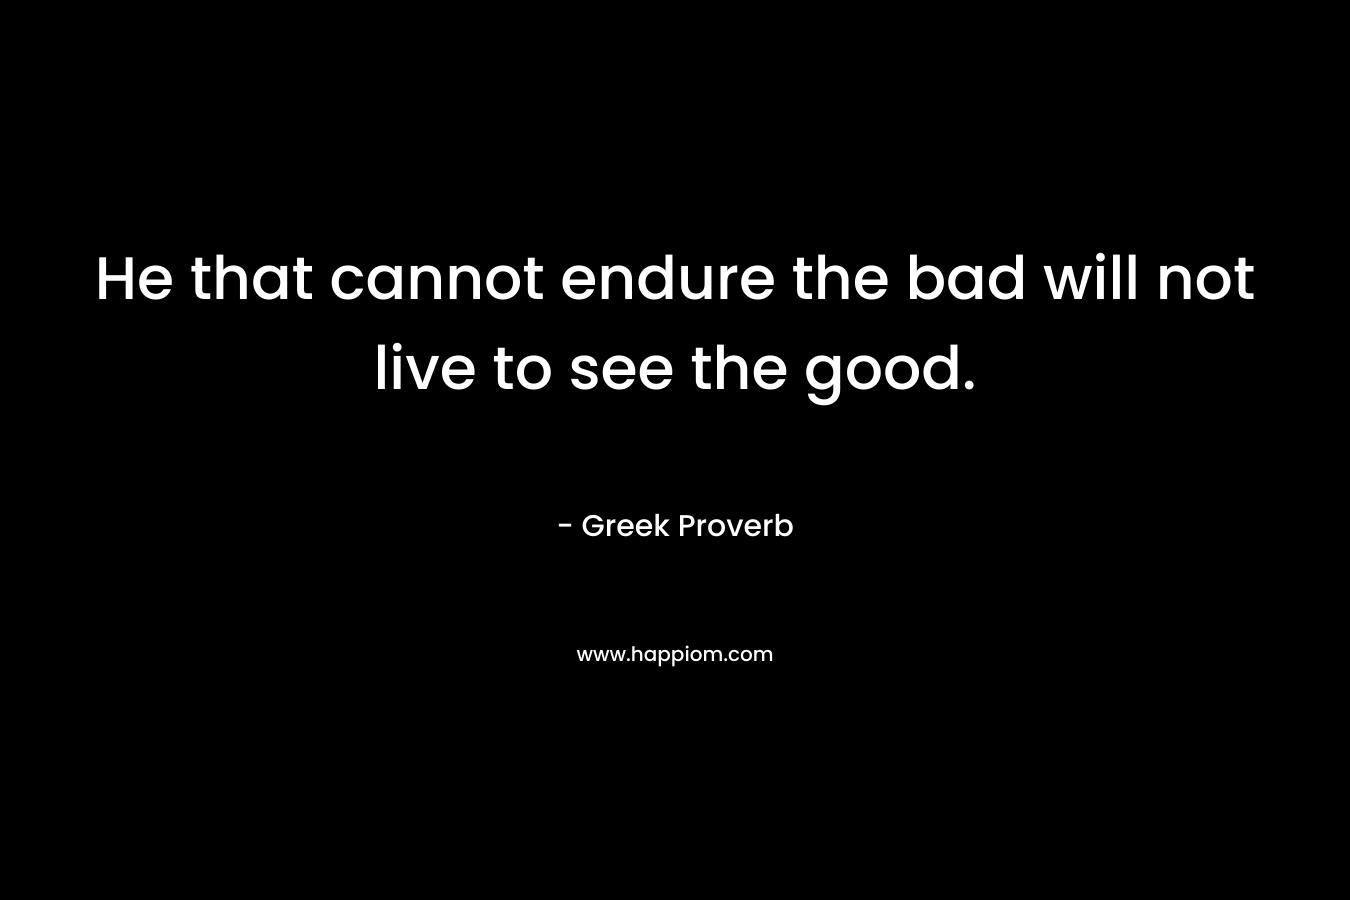 He that cannot endure the bad will not live to see the good.